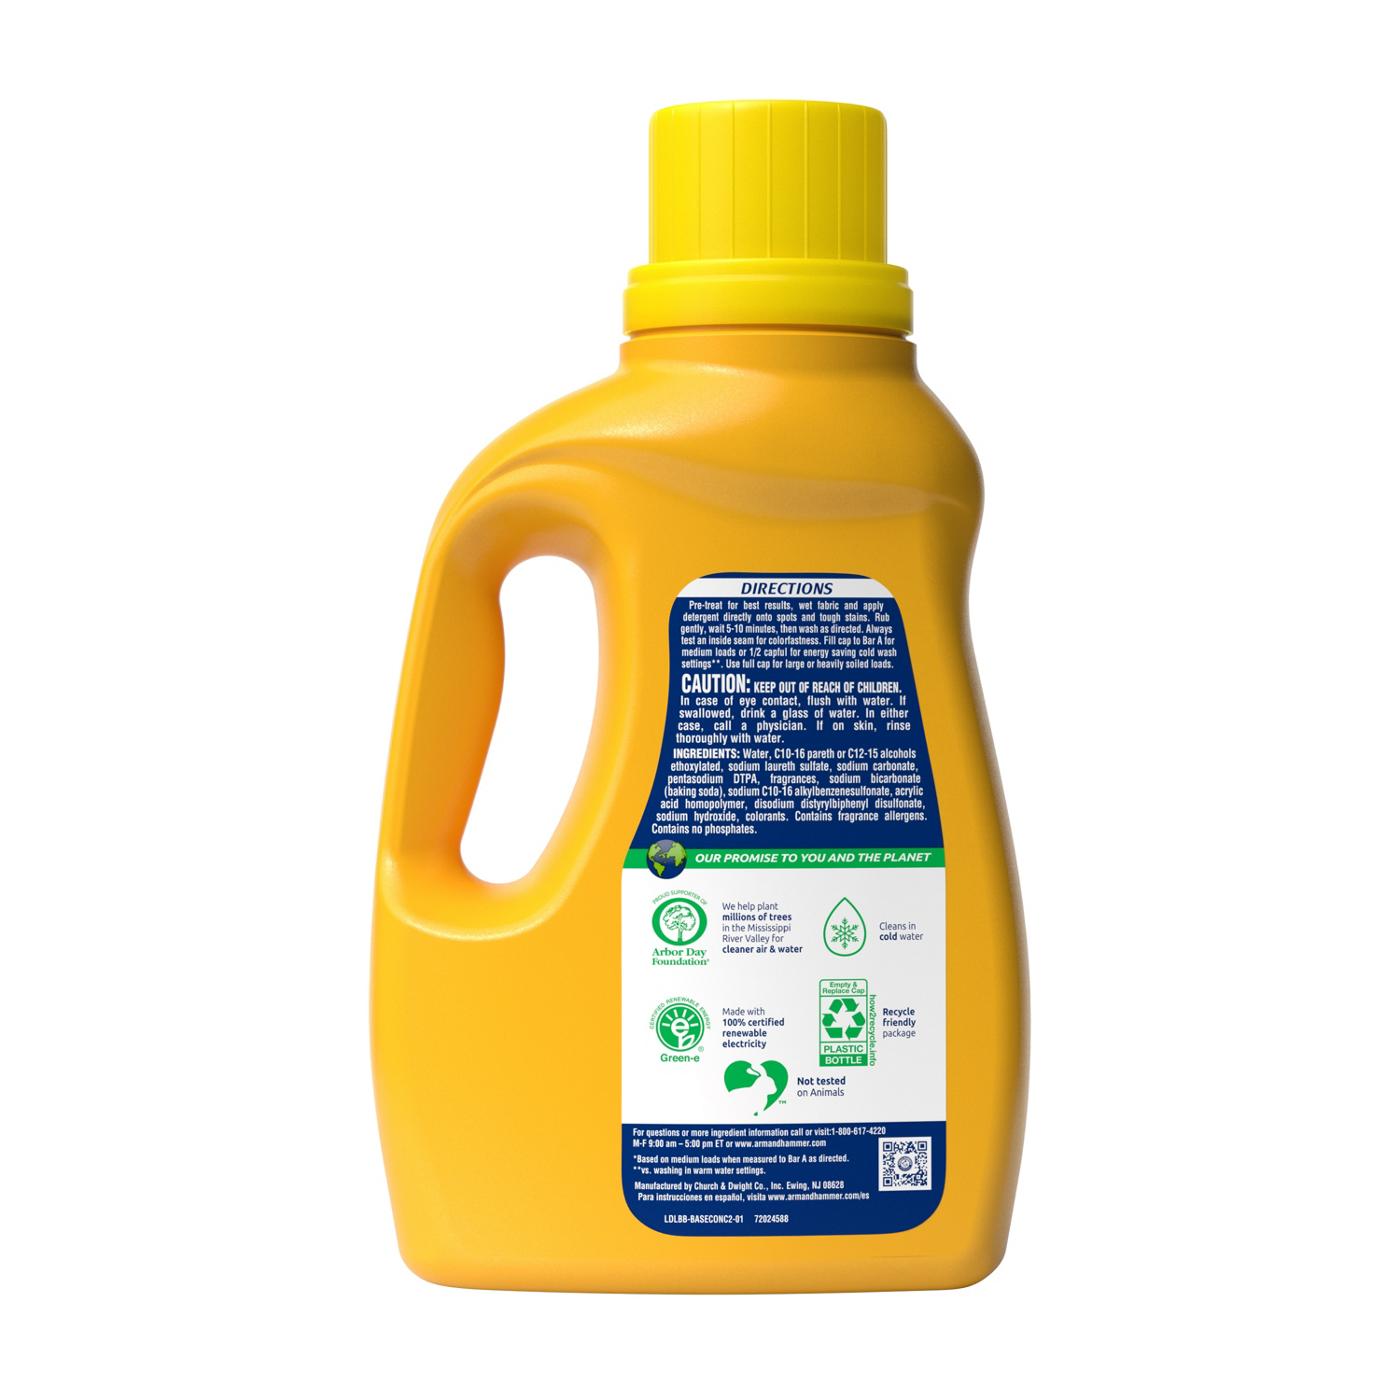 Arm & Hammer Powerfully Clean HE Liquid Laundry Detergent, 50 Loads - Clean Burst; image 3 of 4